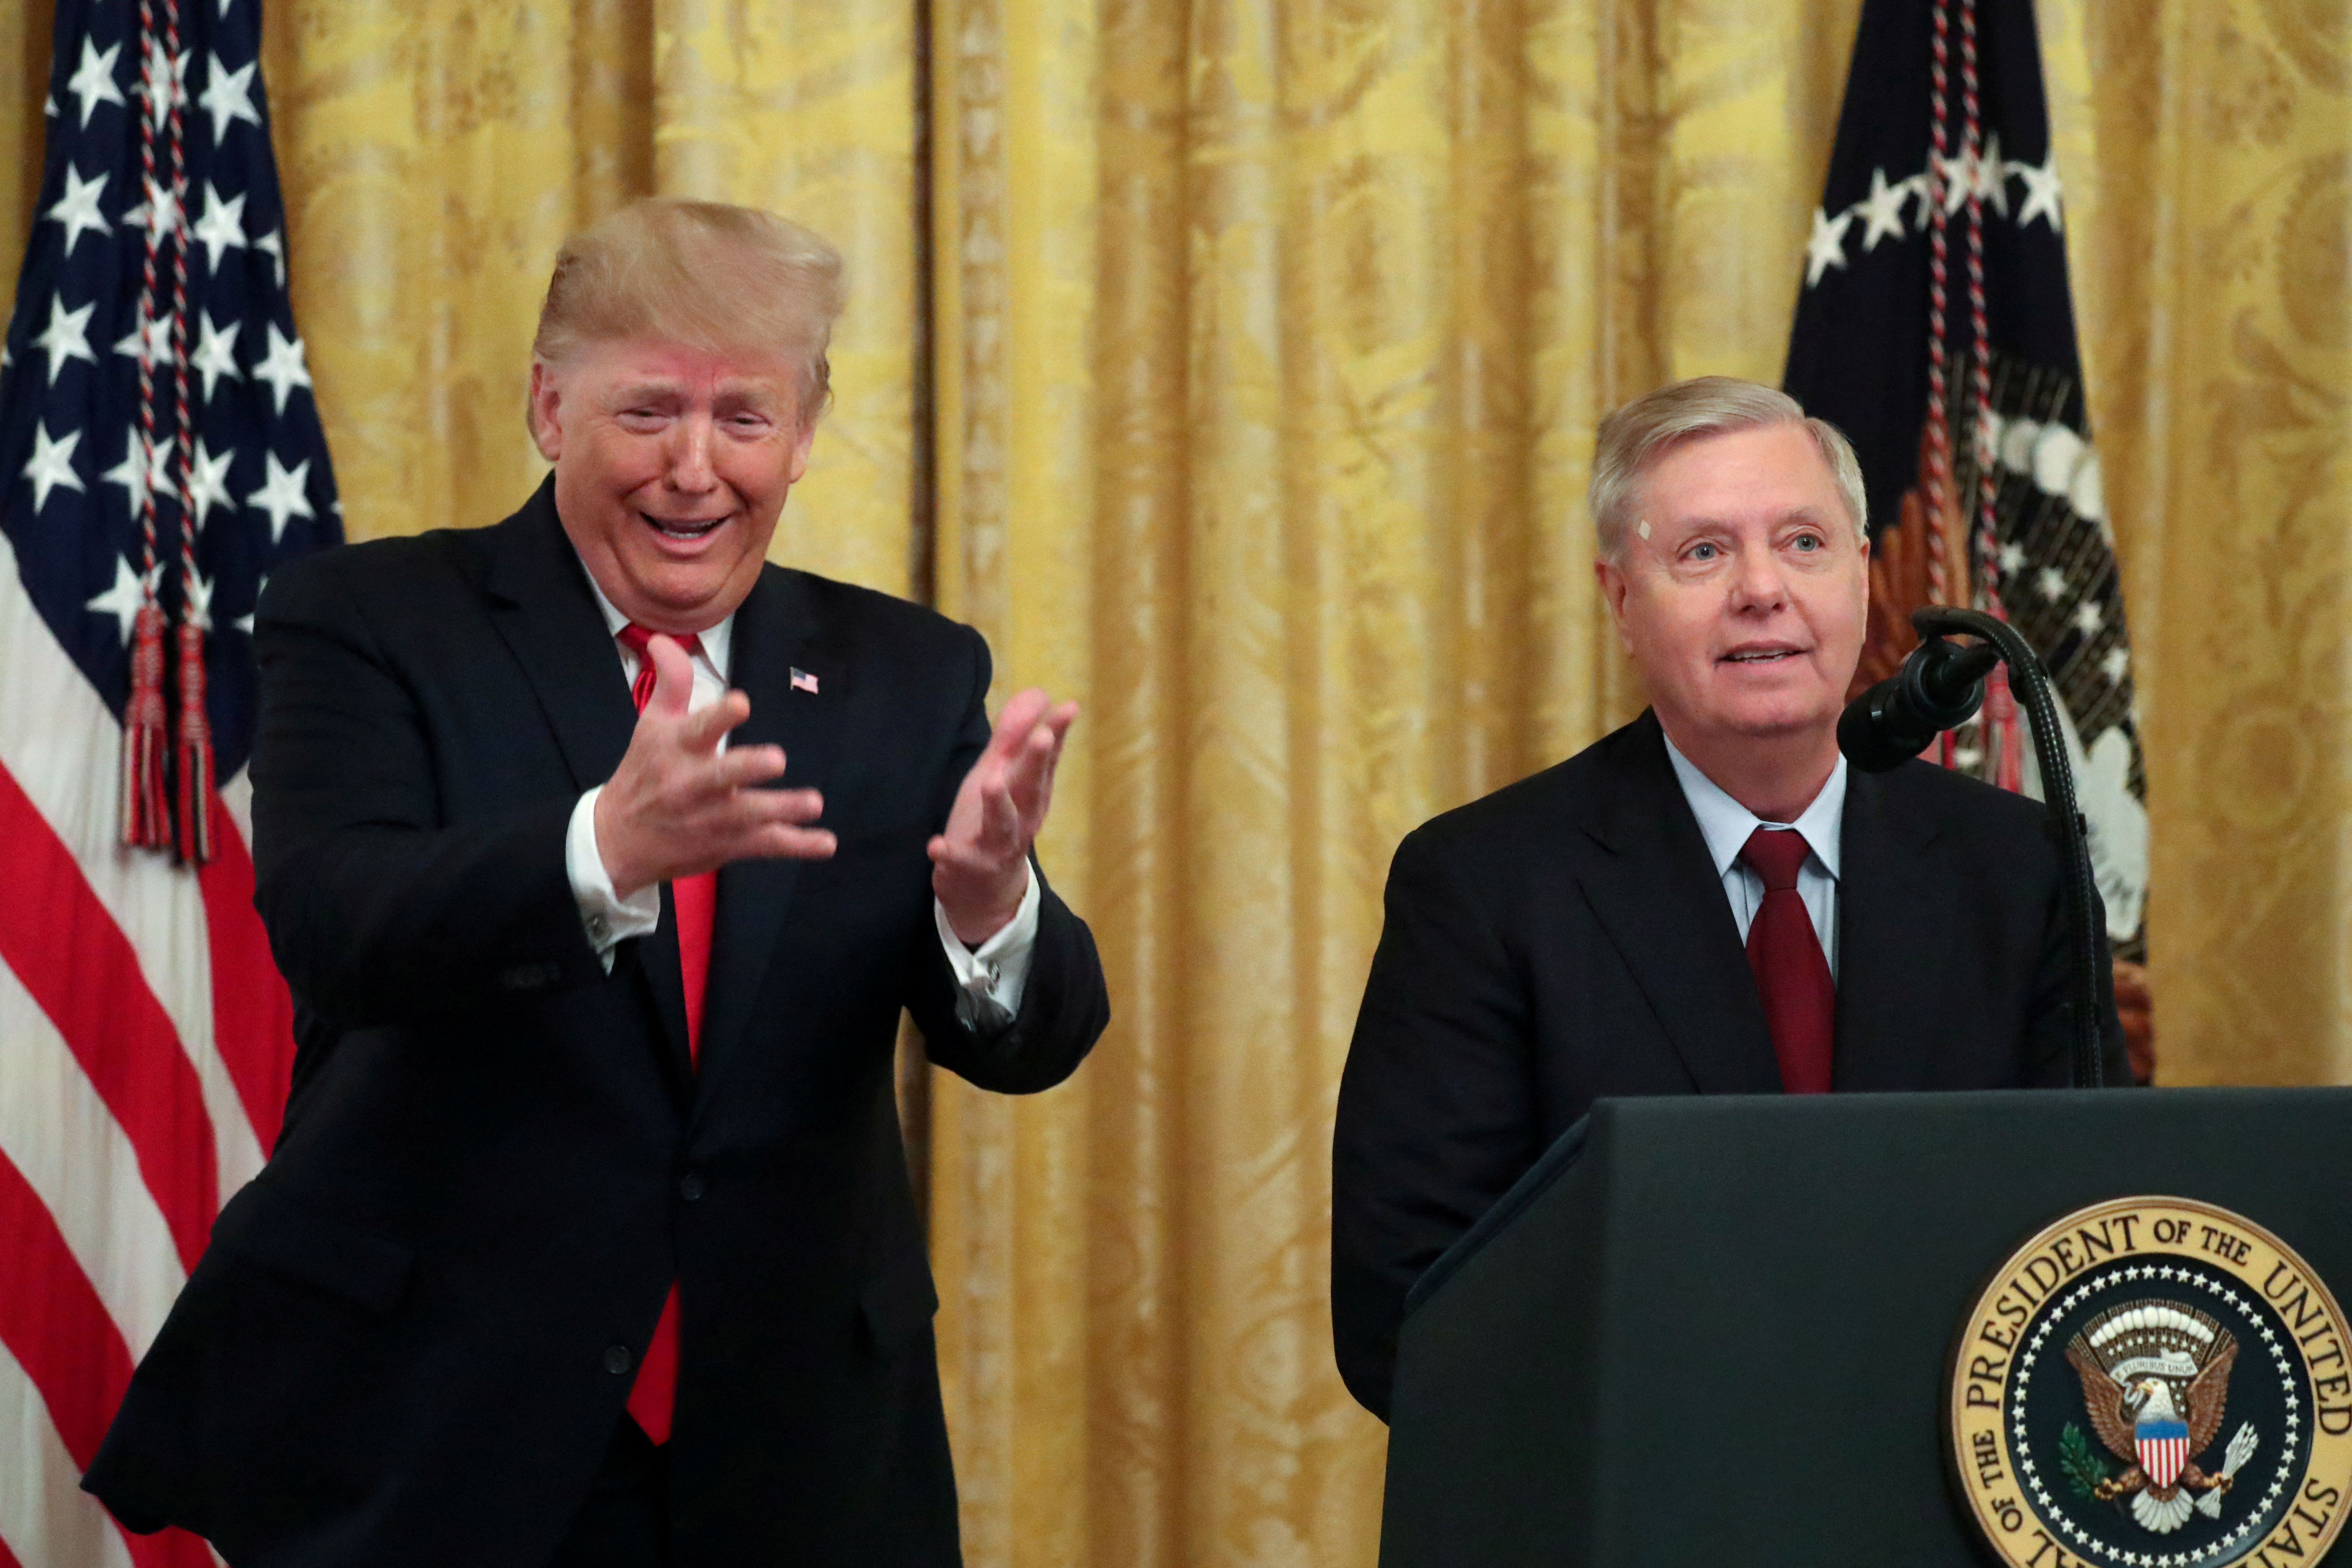 U.S. President Trump jokingly urges Graham and his fellow senators to return to the Capitol to vote for more judge nominees during an event to celebrate federal judicial confirmations in the East Room of the White House in Washington